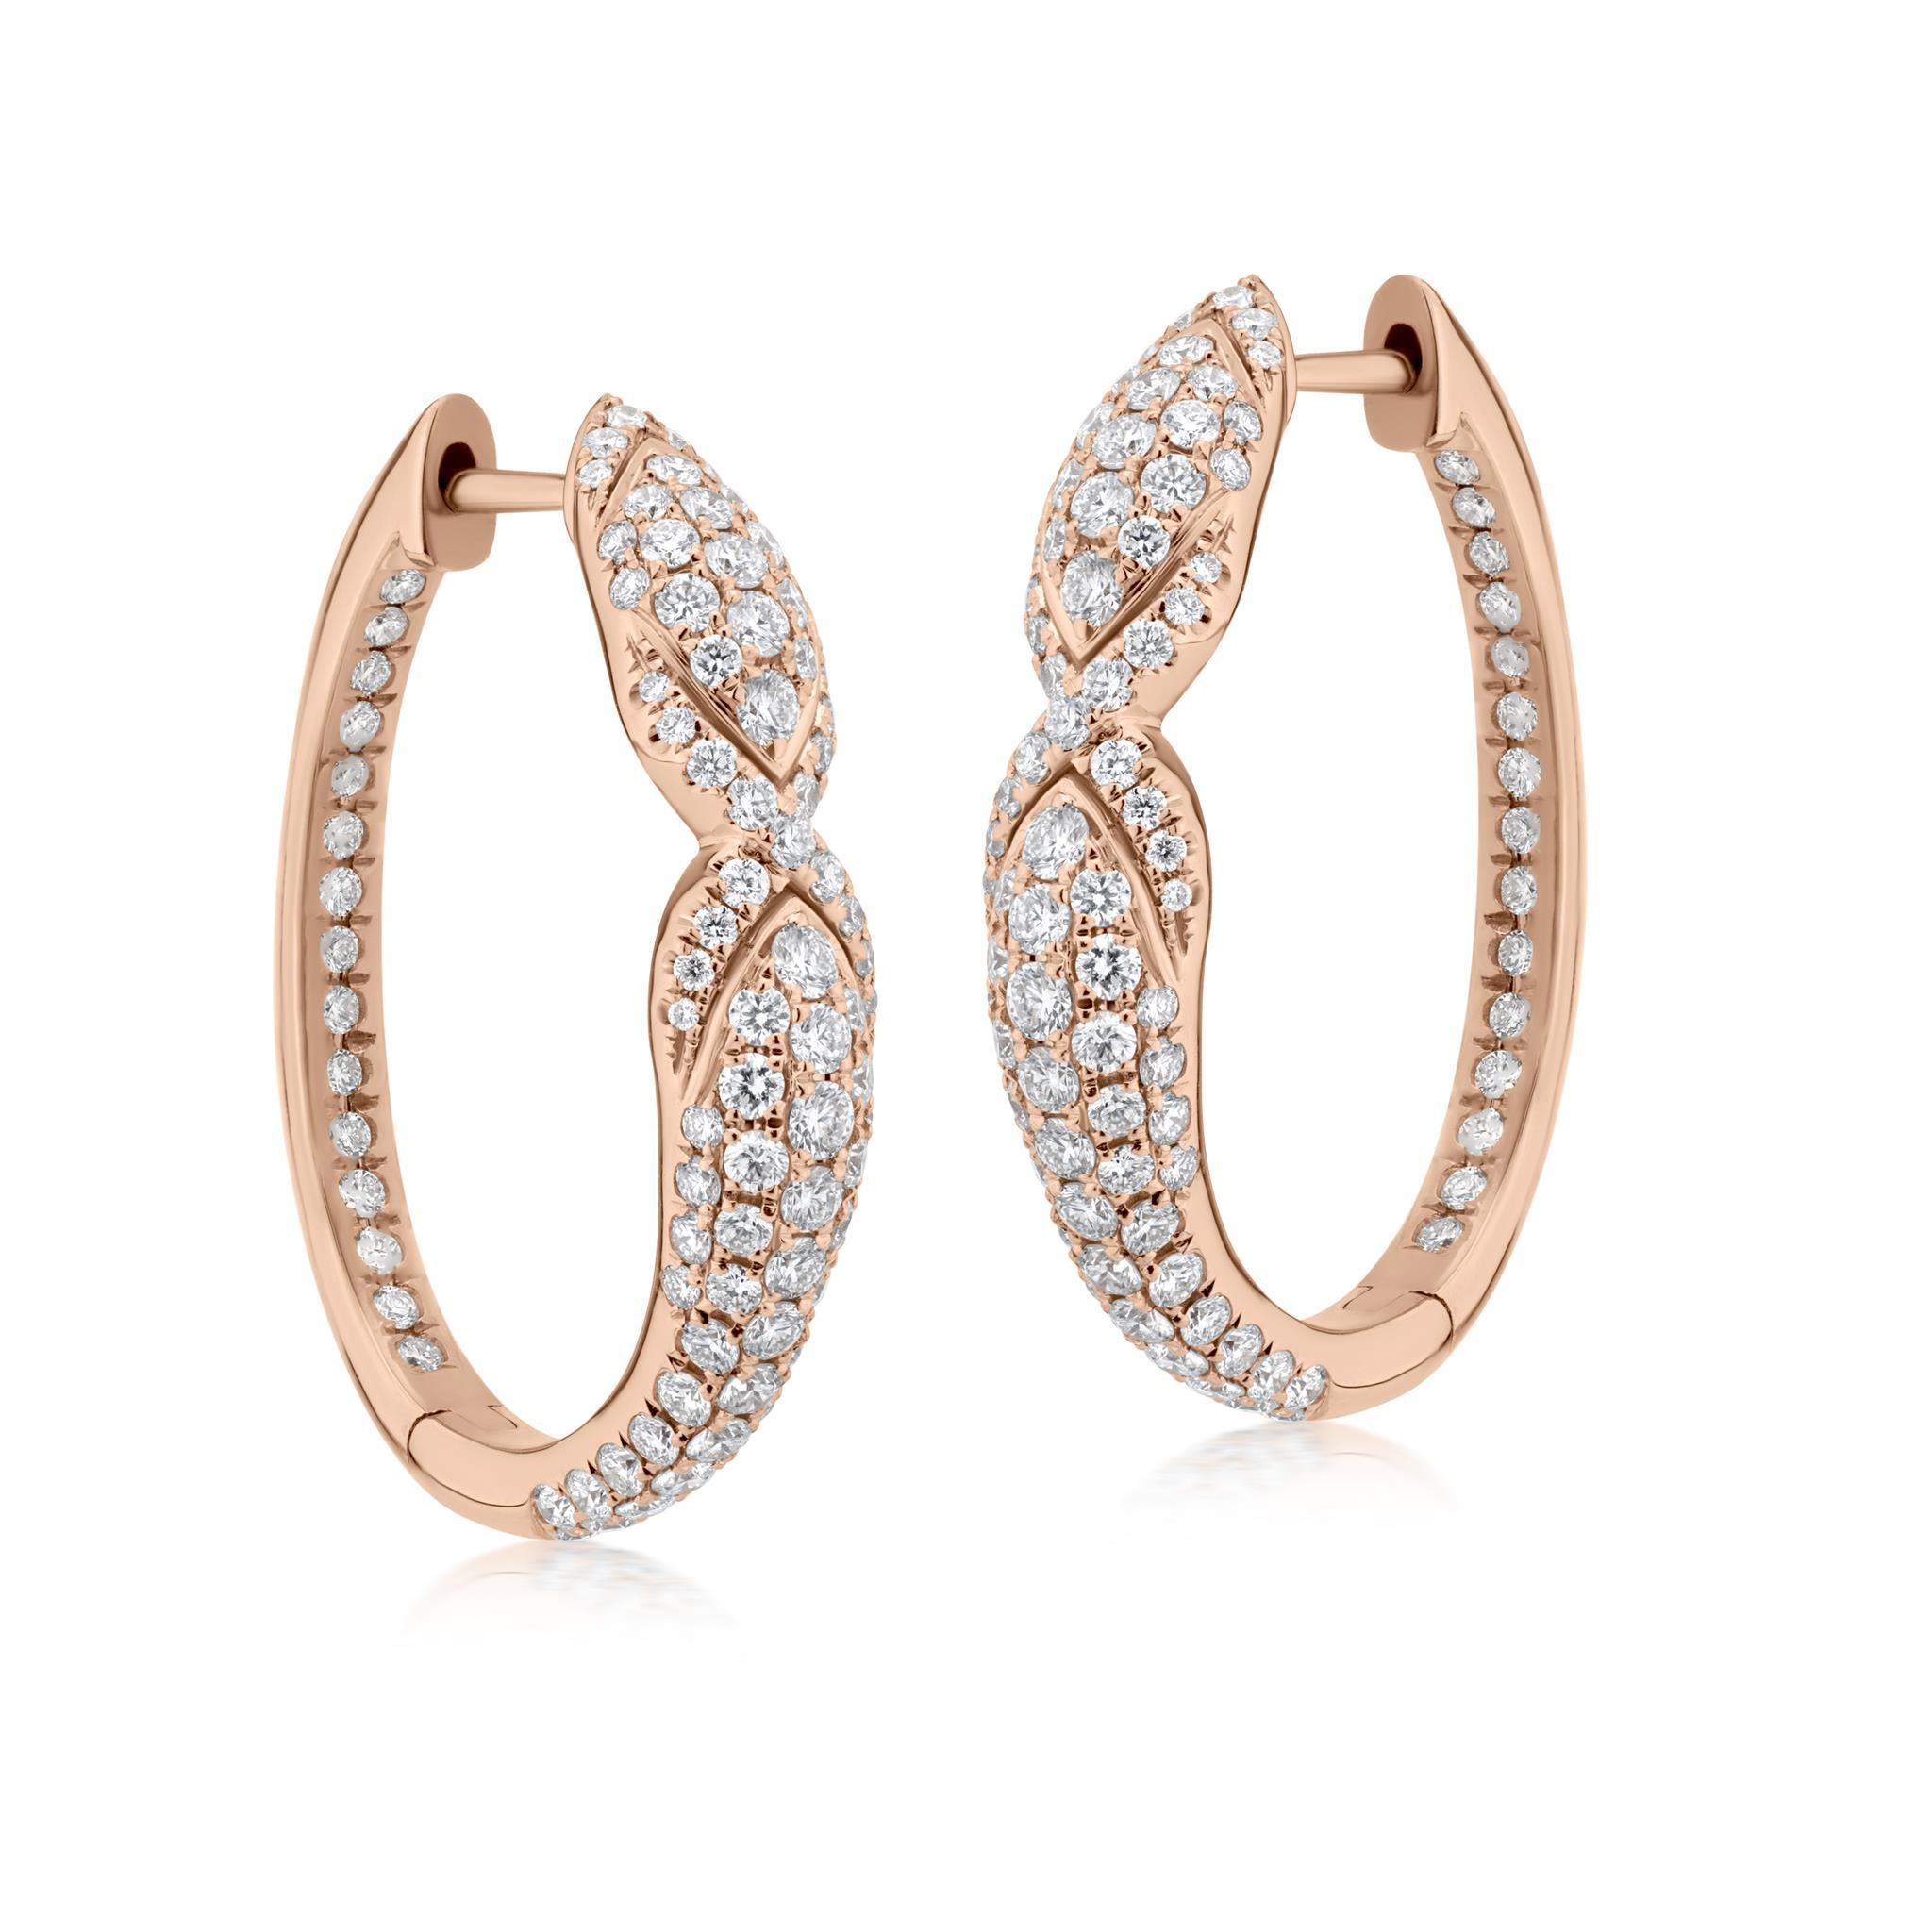 Introducing the Luxle 1.52 Cttw. Diamond Serpentine Hoop Earrings in 18K Ross Gold – a mesmerizing blend of opulence and artistry that exudes elegance from every angle. Crafted to perfection, these earrings redefine sophistication with their unique